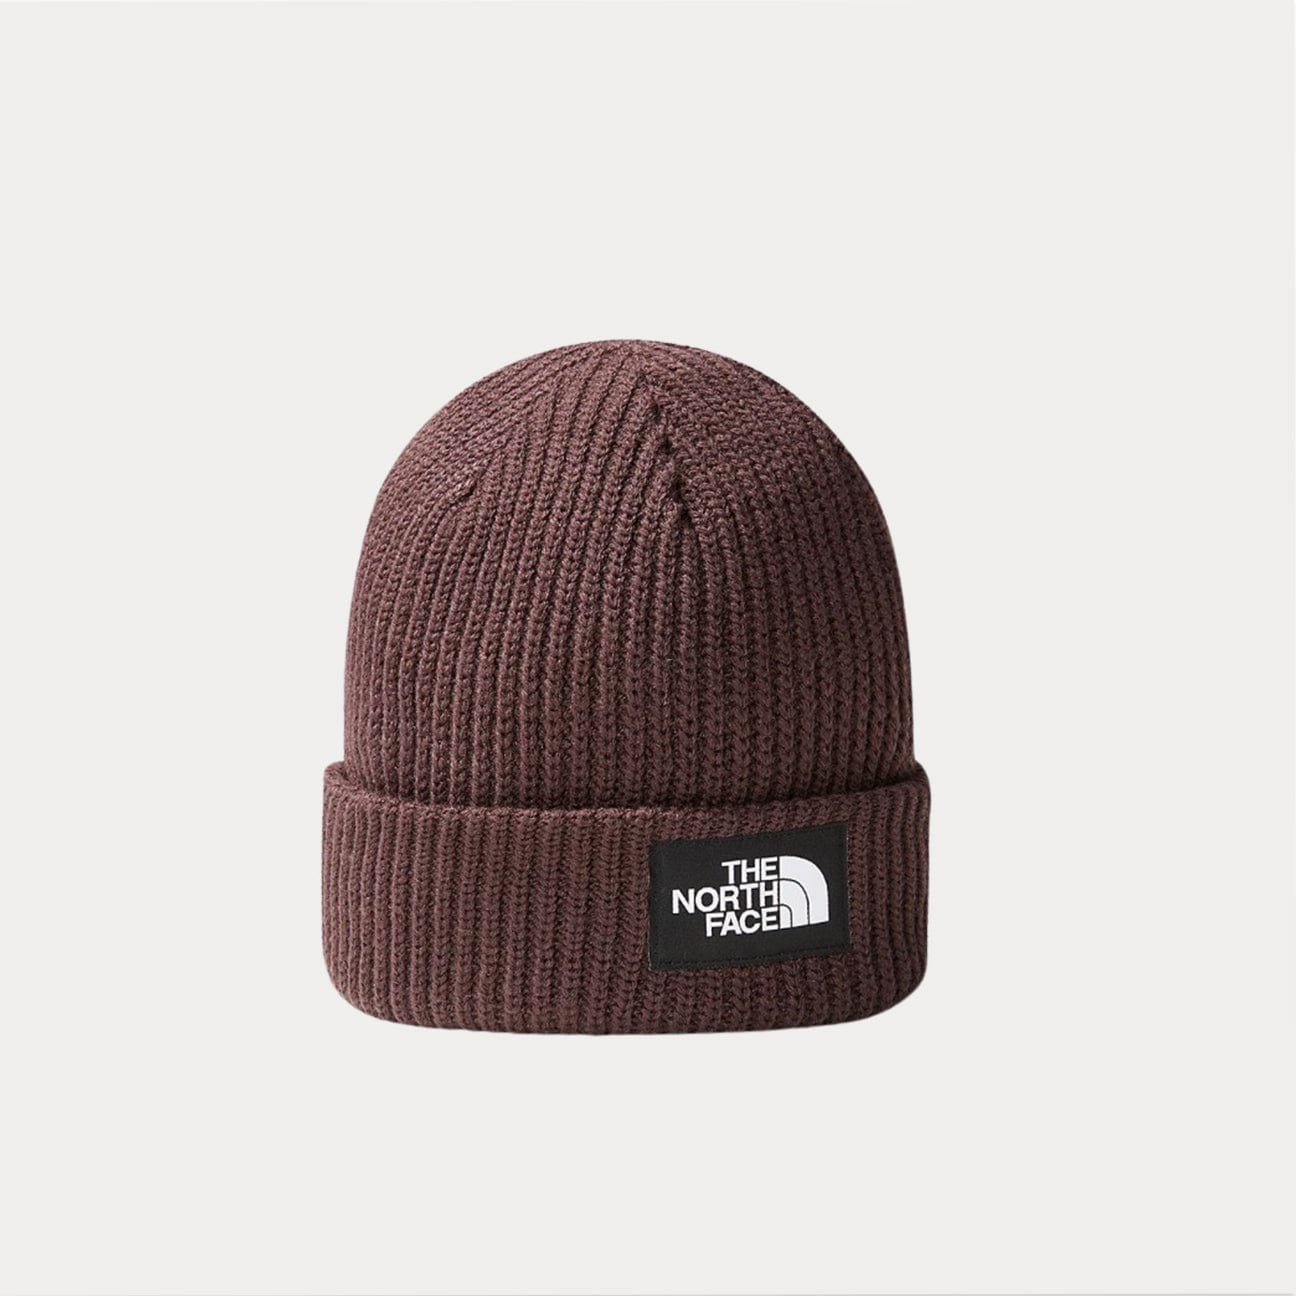 THE NORTH FACE Cappello Beanie Salty Dog Brown